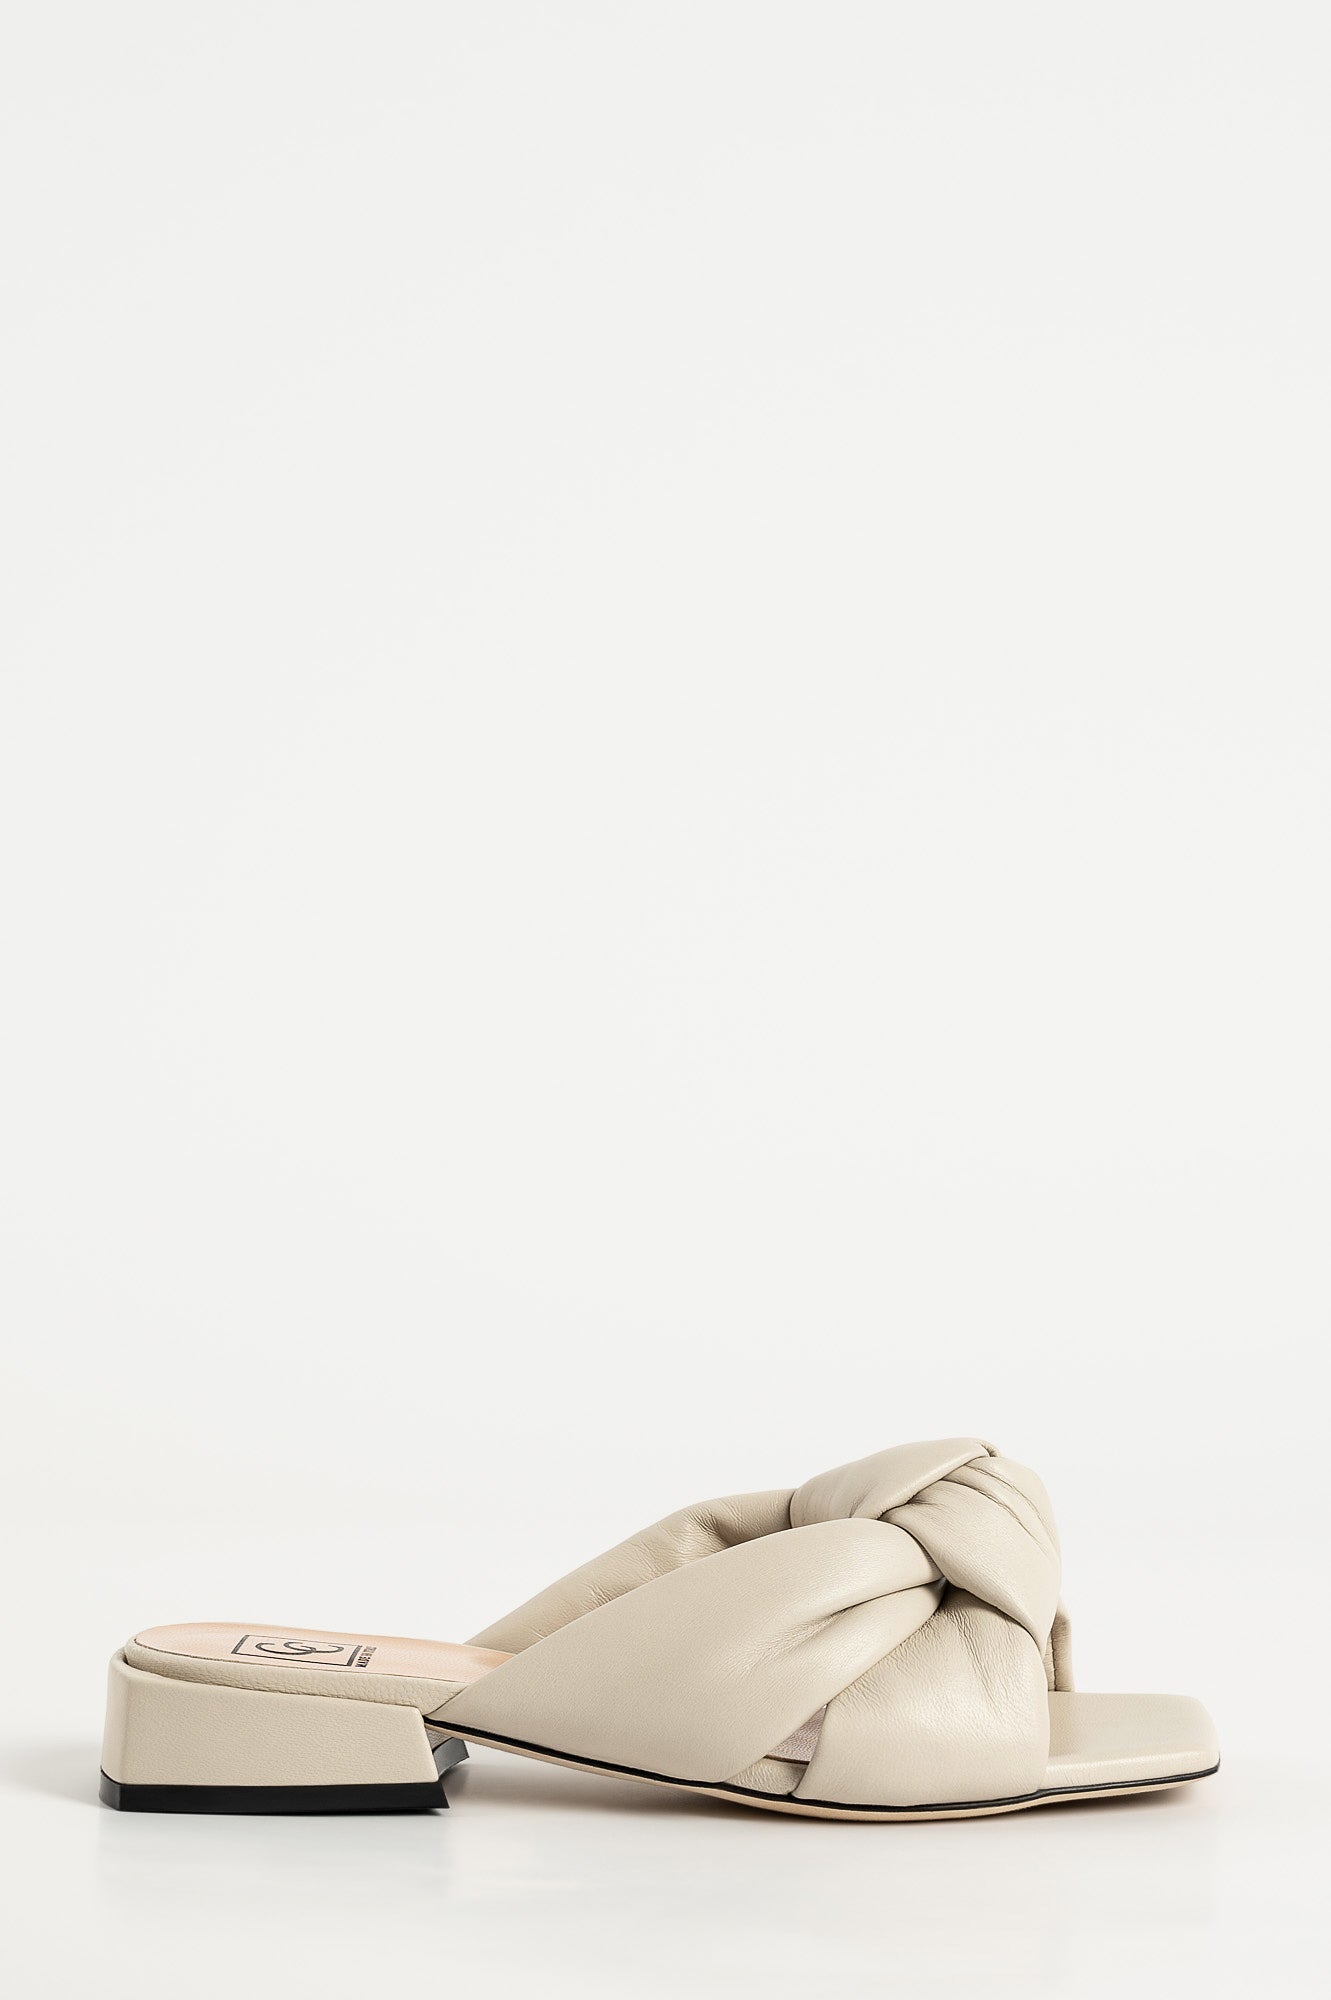 Sandal Lina 122 | Off-White Leather